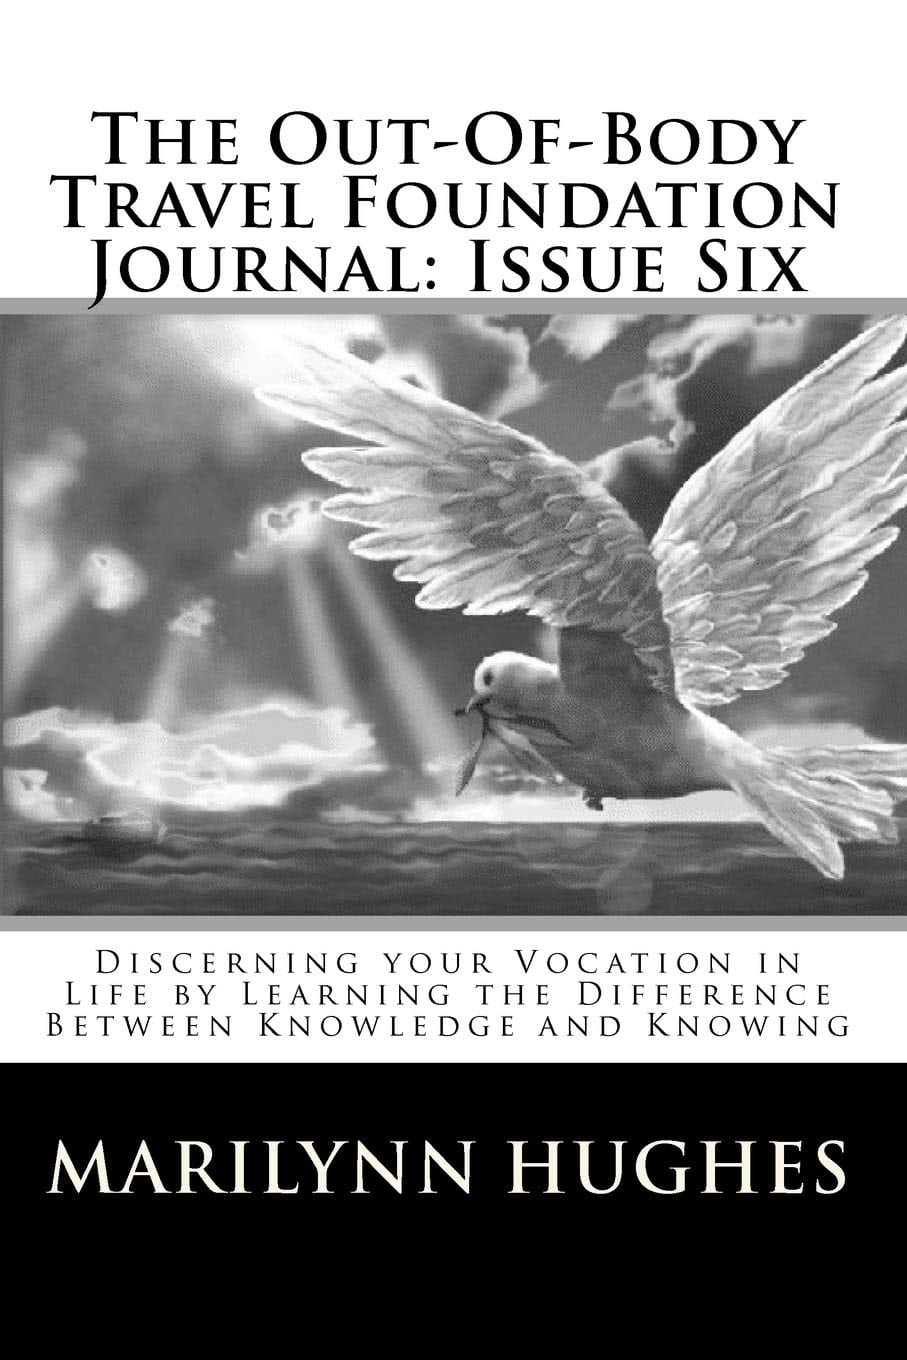 Discerning your Vocation in Life by Learning the Difference Between Knowledge and Knowing, By Marilynn Hughes